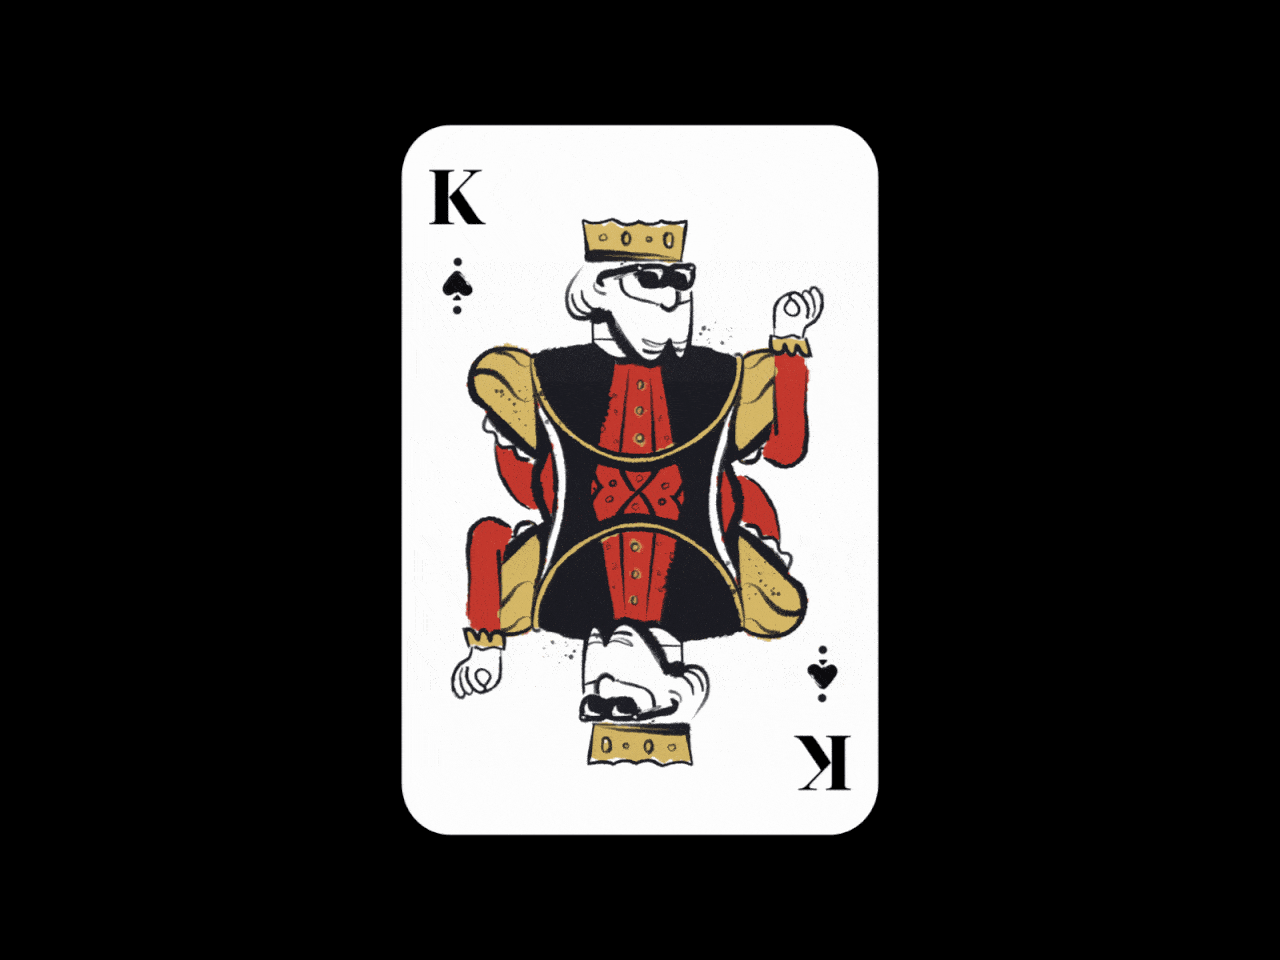 This is an animated GIF picture of a playing card (of the 52 cards standard deck, specifically a king of spades). Under the picture you can read about the various advantage gambling techniques utilized by professional gamblers to make money gambling, betting, step by step tutorials and videos included as well (they open in new tabs).